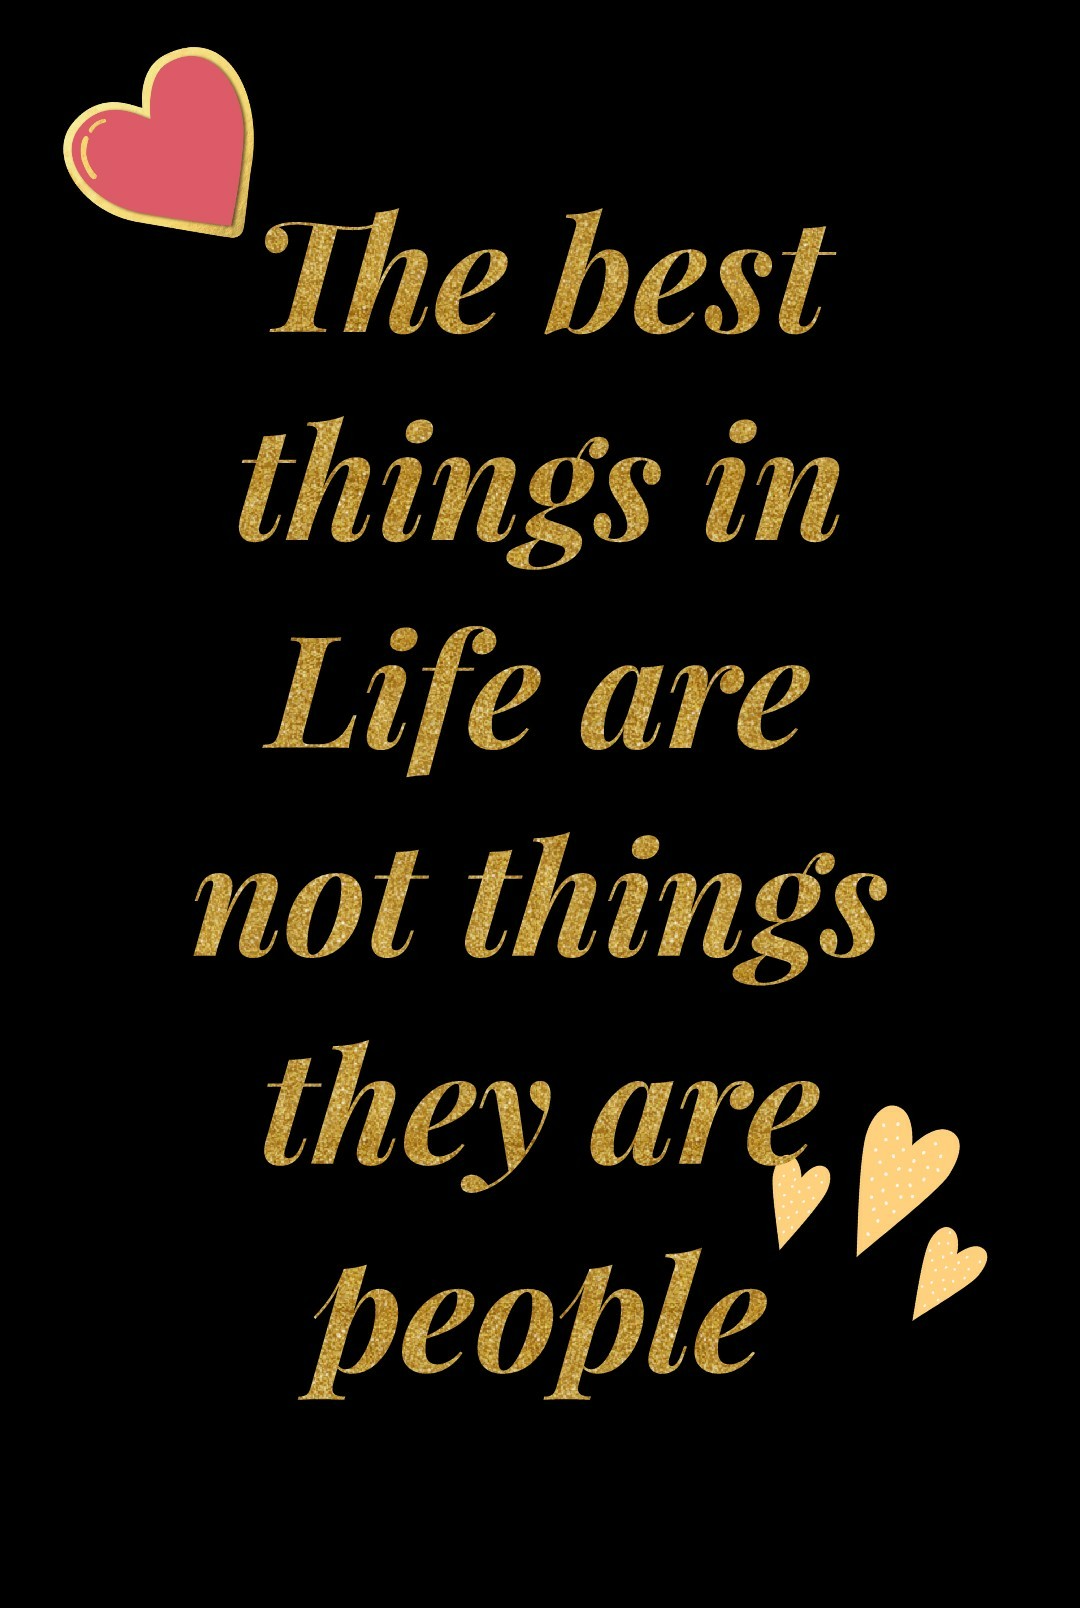 The best
things in
Life are
not things
they are
people